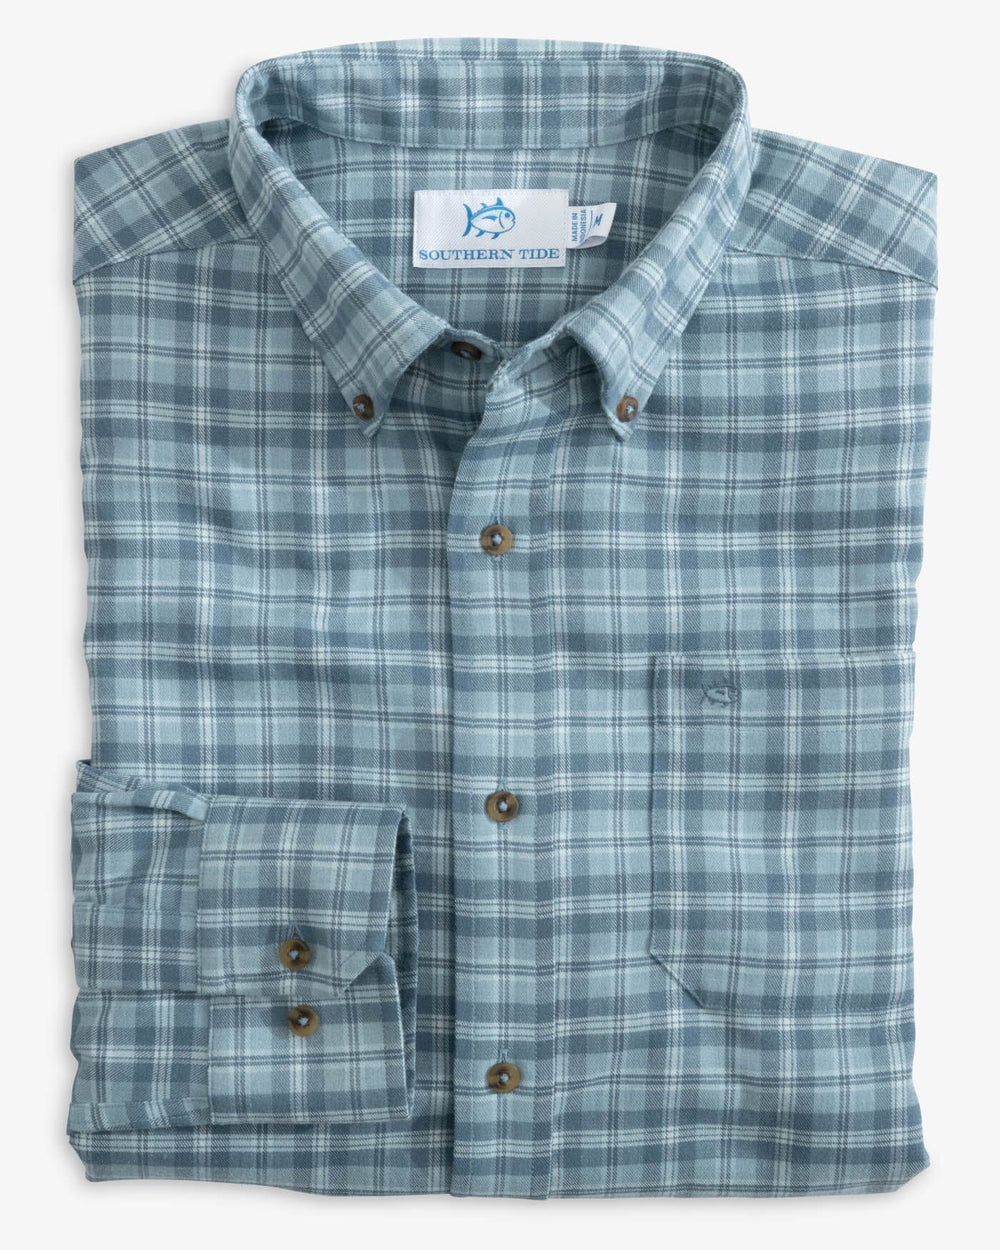 The front view of the Southern Tide Heather Lakewood Plaid Sport Shirt by Southern Tide - Heather Mountain Spring Blue